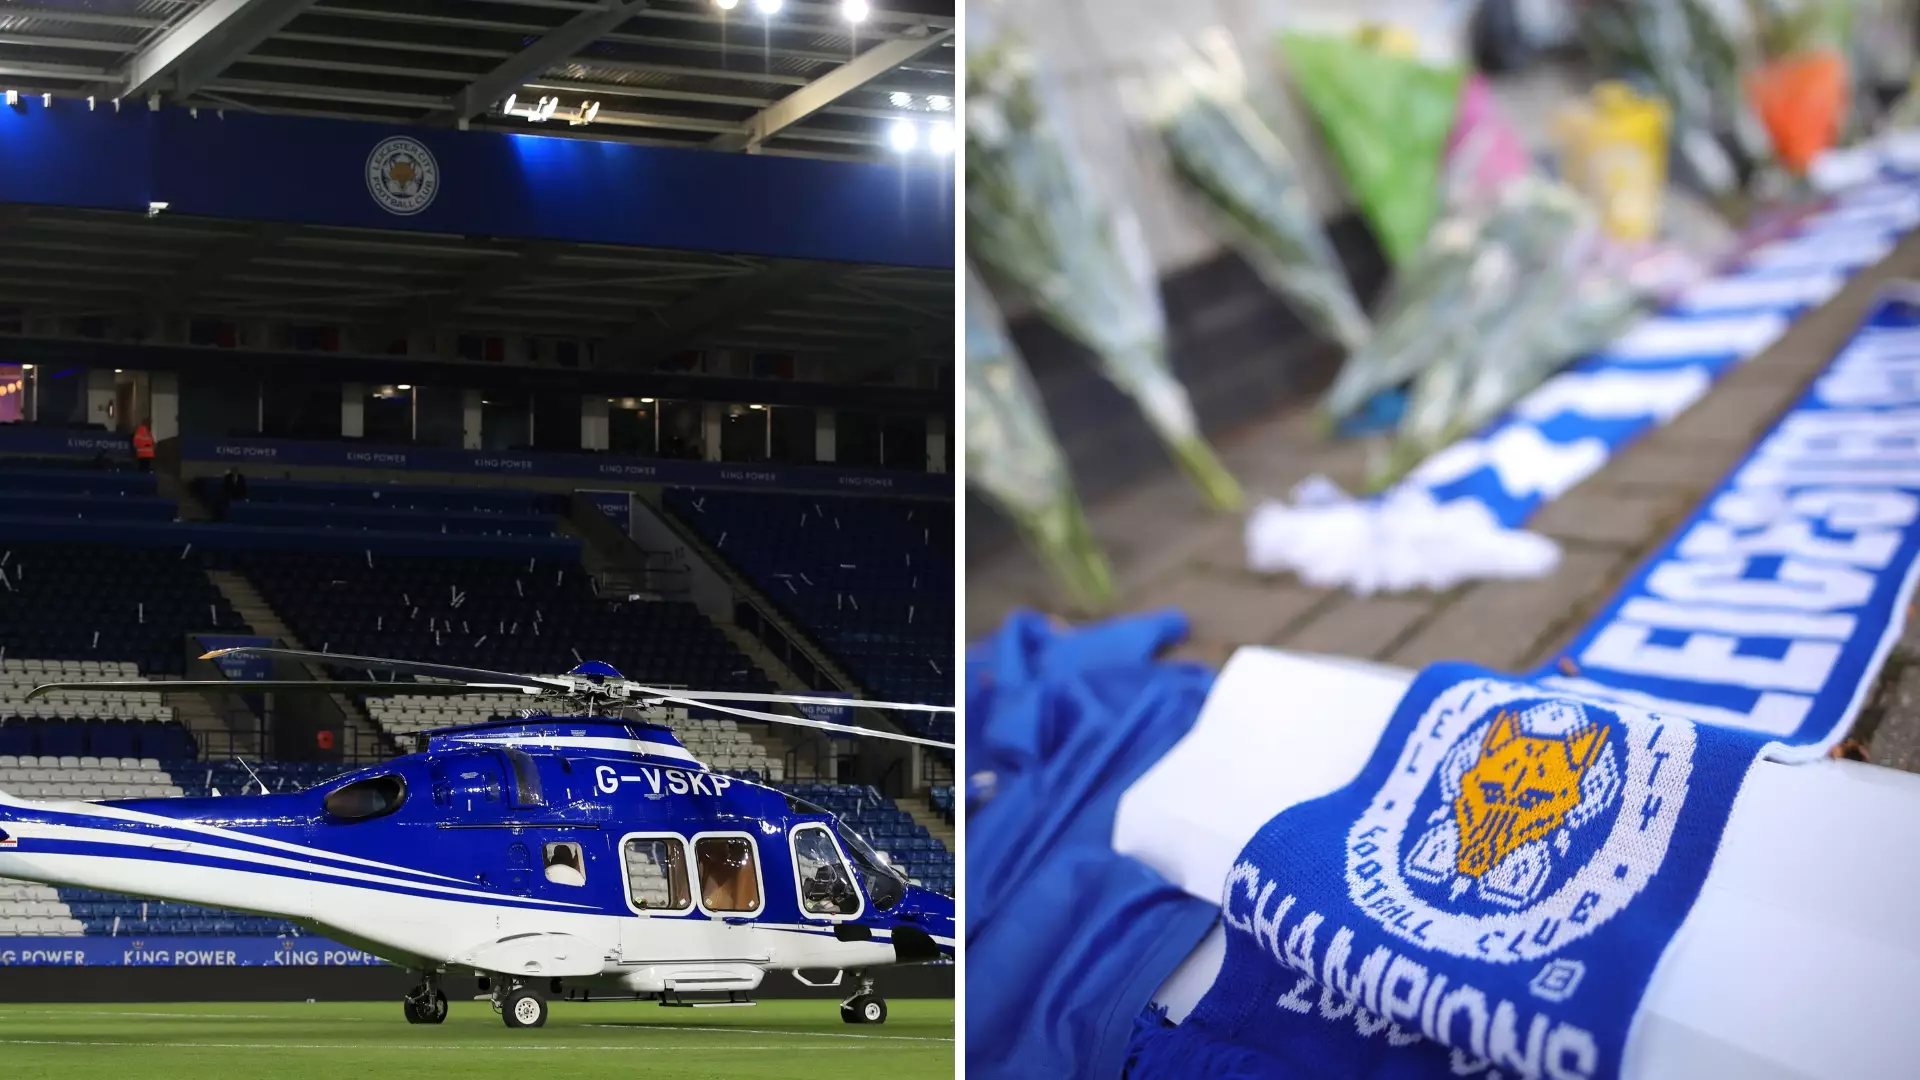 Leicester City Owner Vichai Srivaddhanaprabha And His Daughter Amongst Five People In Crashed Helicopter